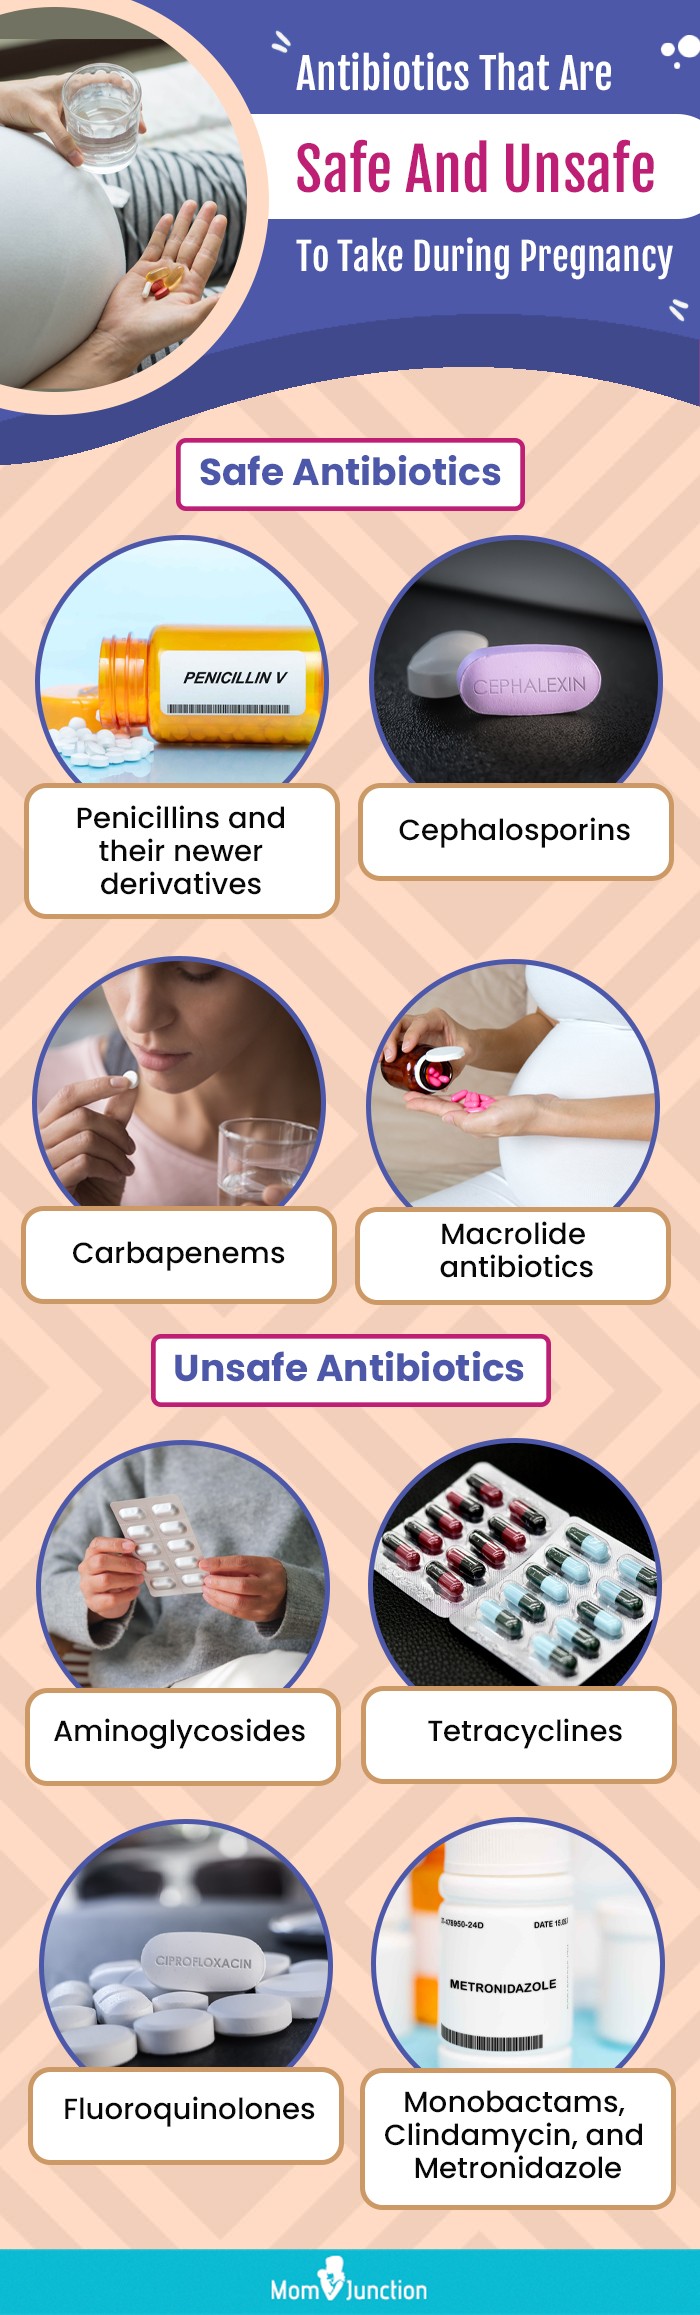 antibiotics that are safe and unsafe to take during pregnancy (infographic)